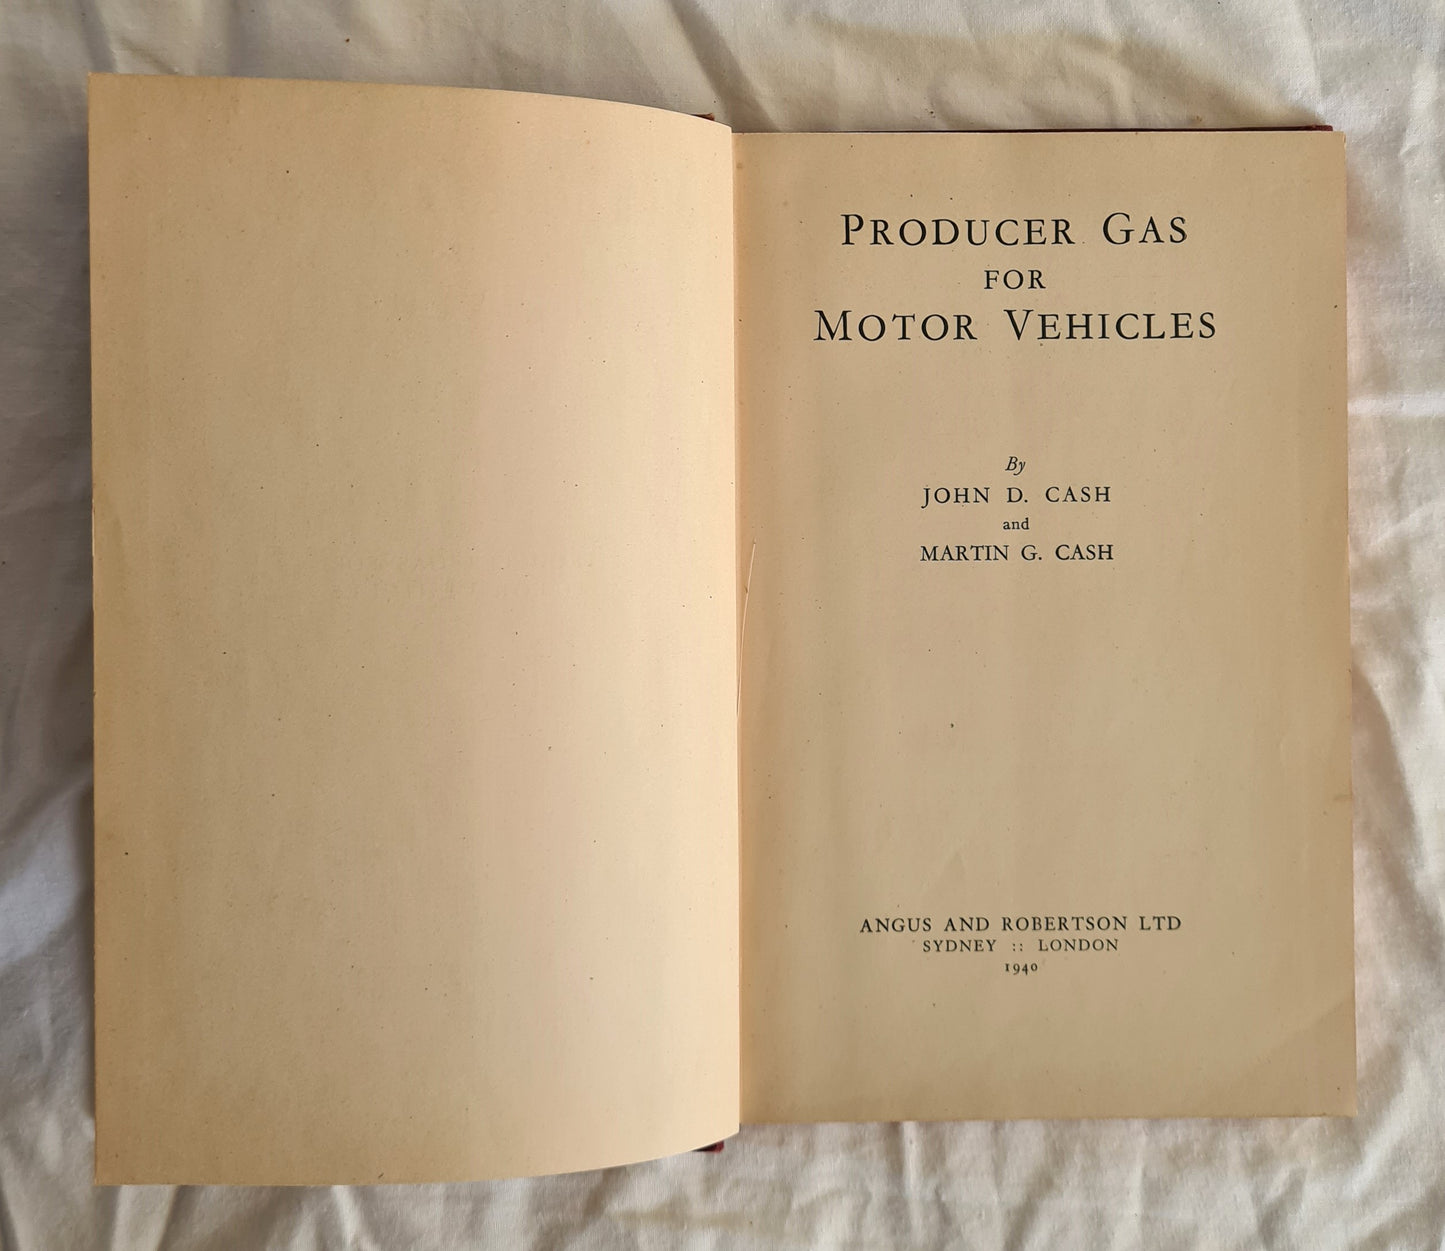 Producer Gas for Motor Vehicles by John D. Cash and Martin G. Cash